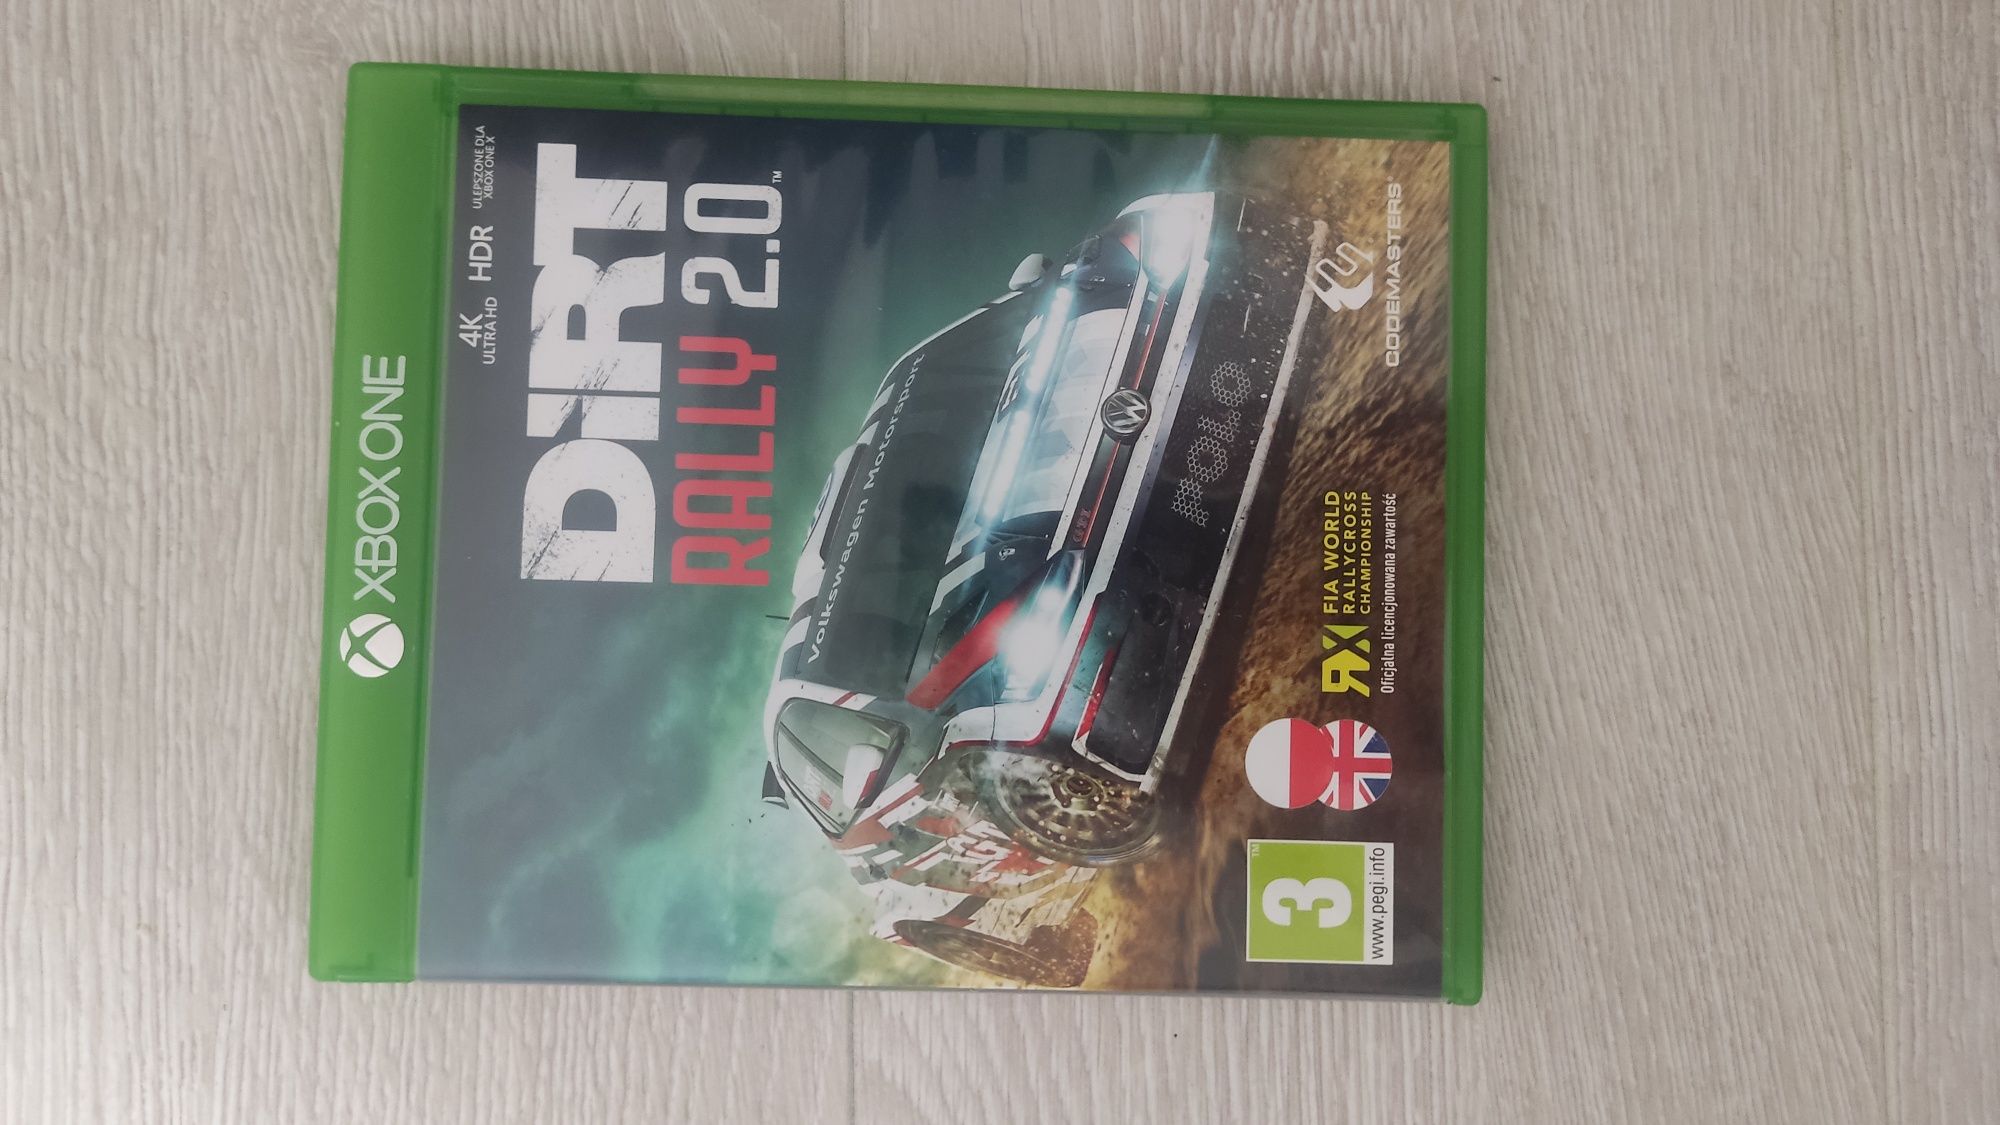 Dirt rally 2.0 Xbox one